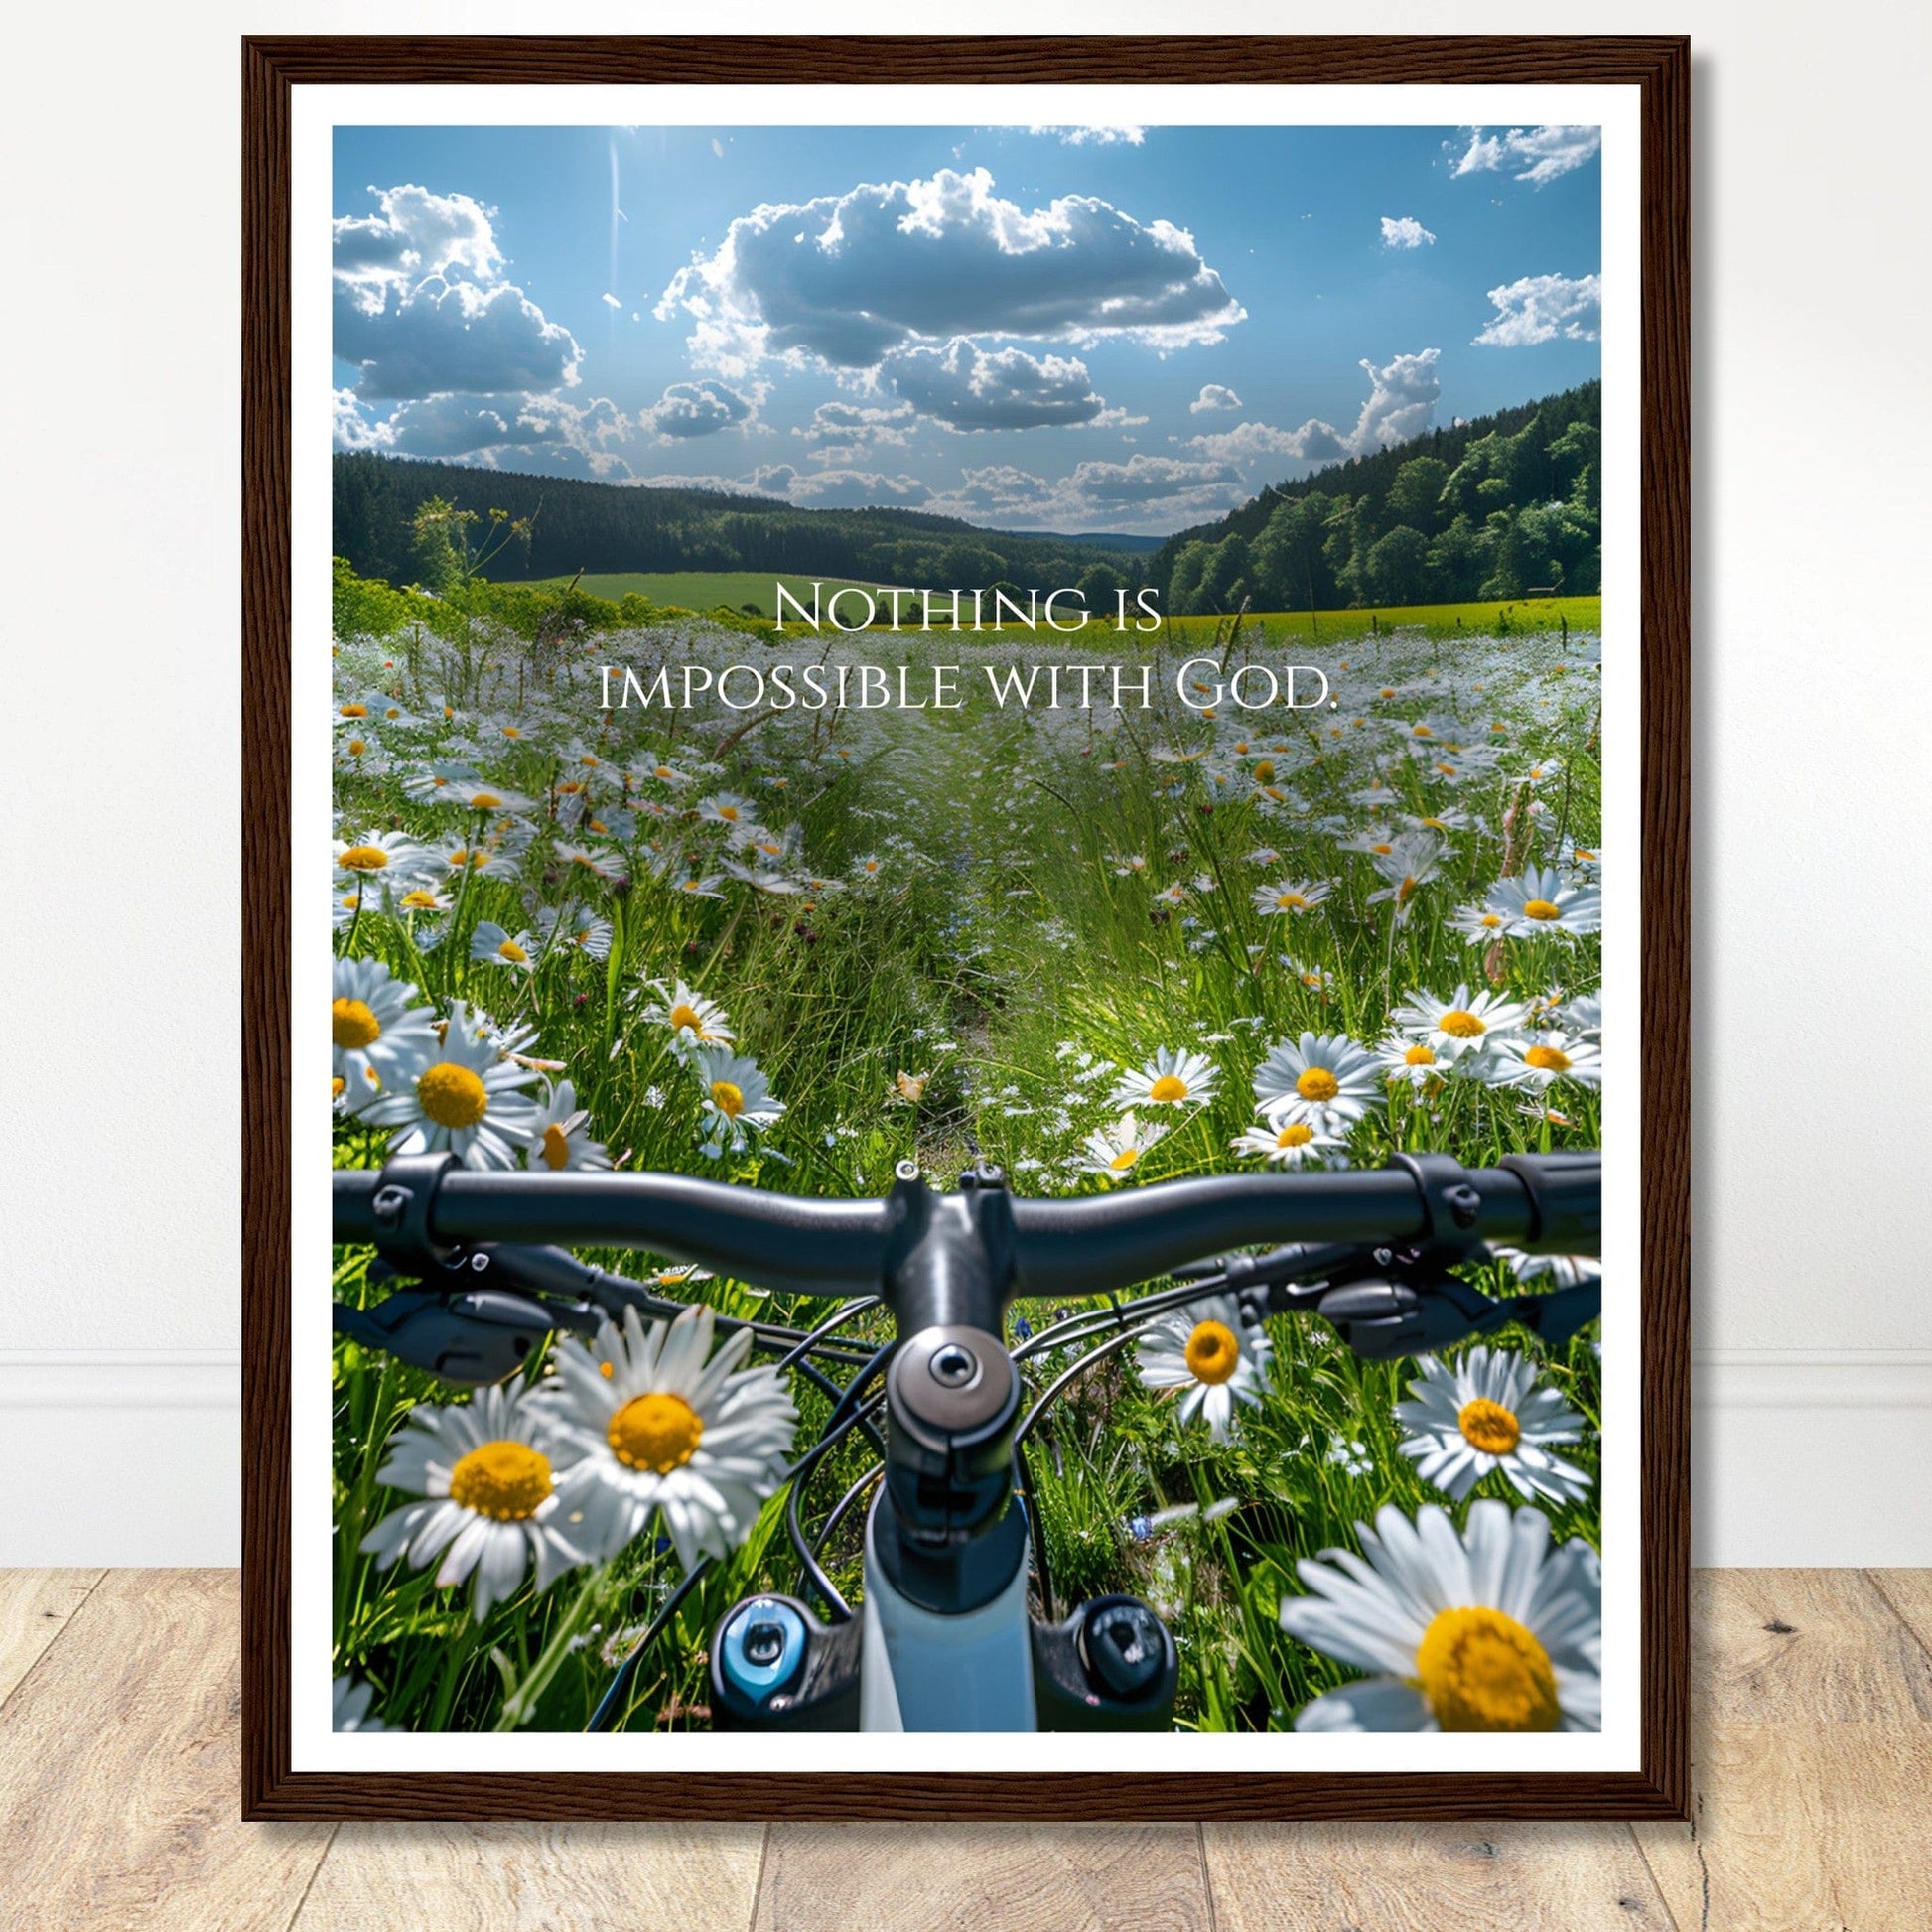 Coffee With My Father Print Material 40x50 cm / 16x20″ / Premium Matte Paper Wooden Framed Poster / Dark wood frame Nothing is Impossible With God - Artwork